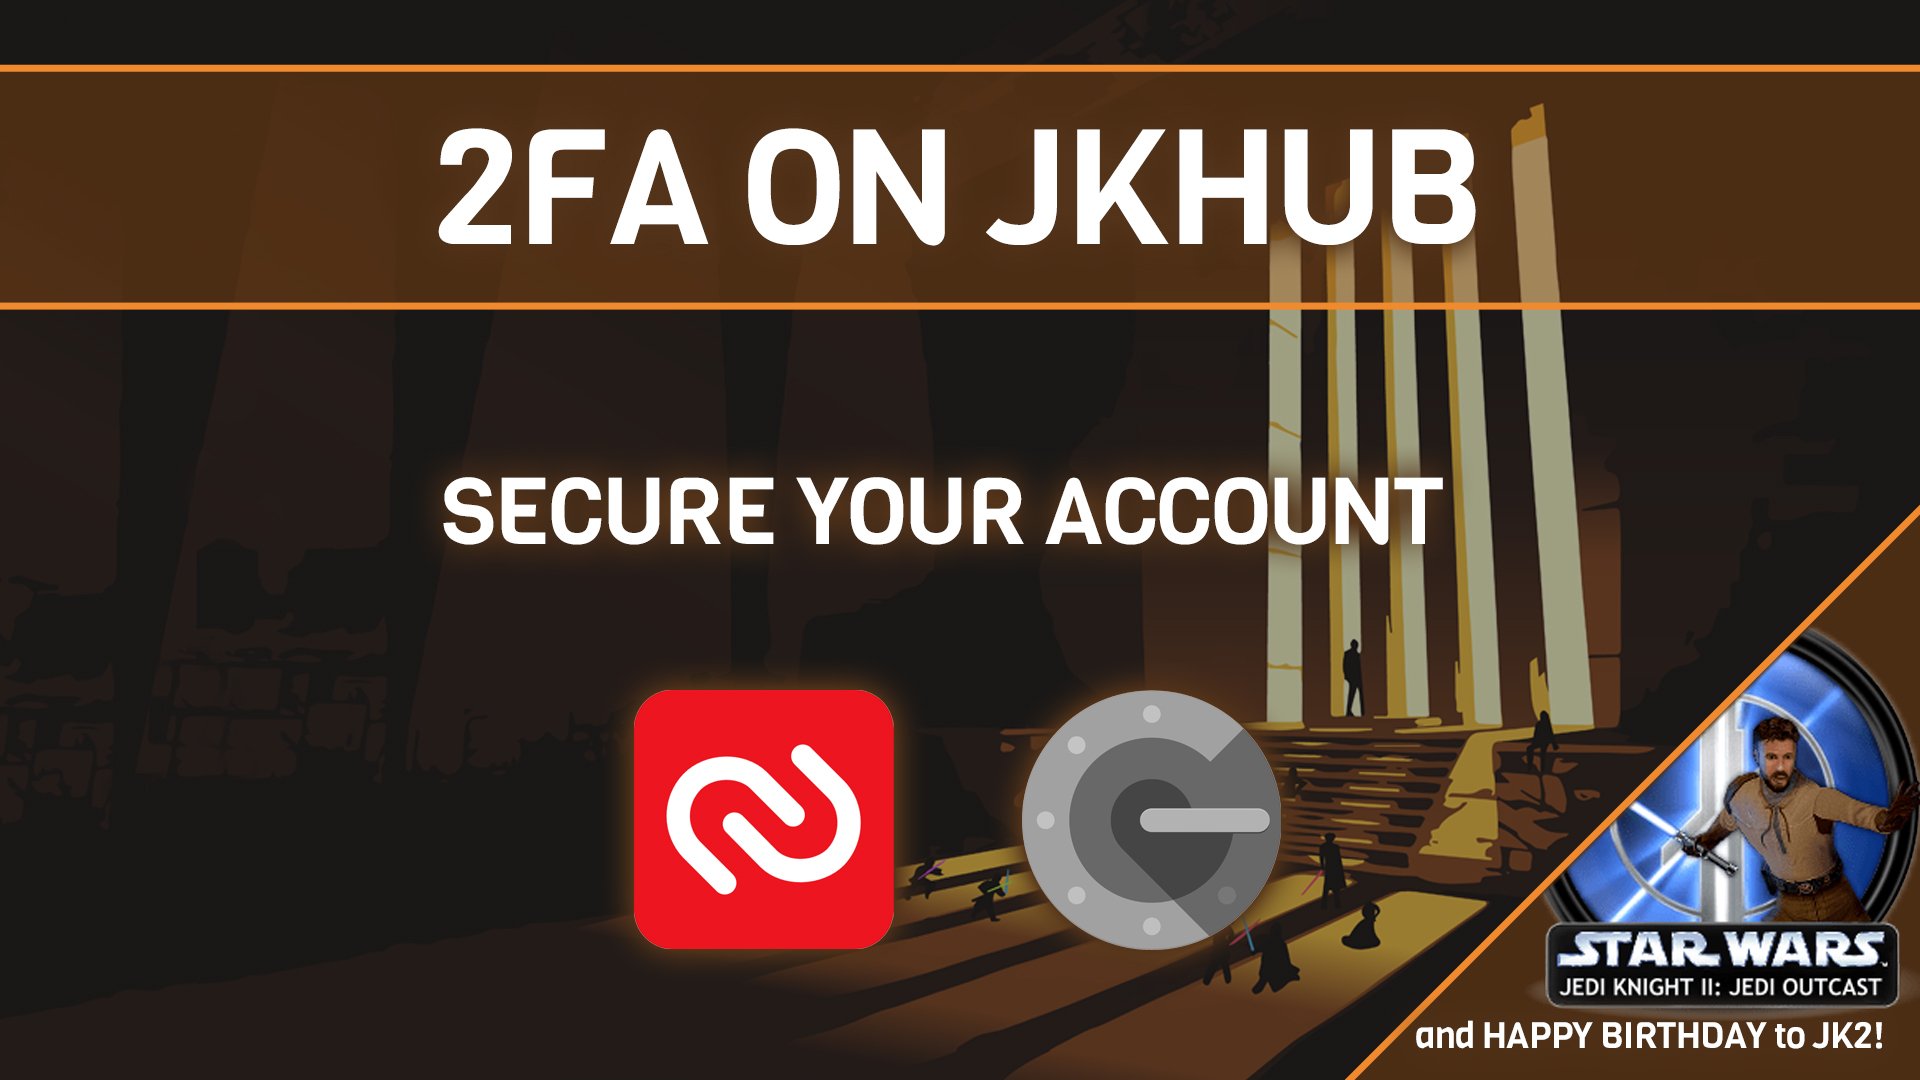 More information about "2FA is now an option on JKHub, and Jedi Outcast turns 21"